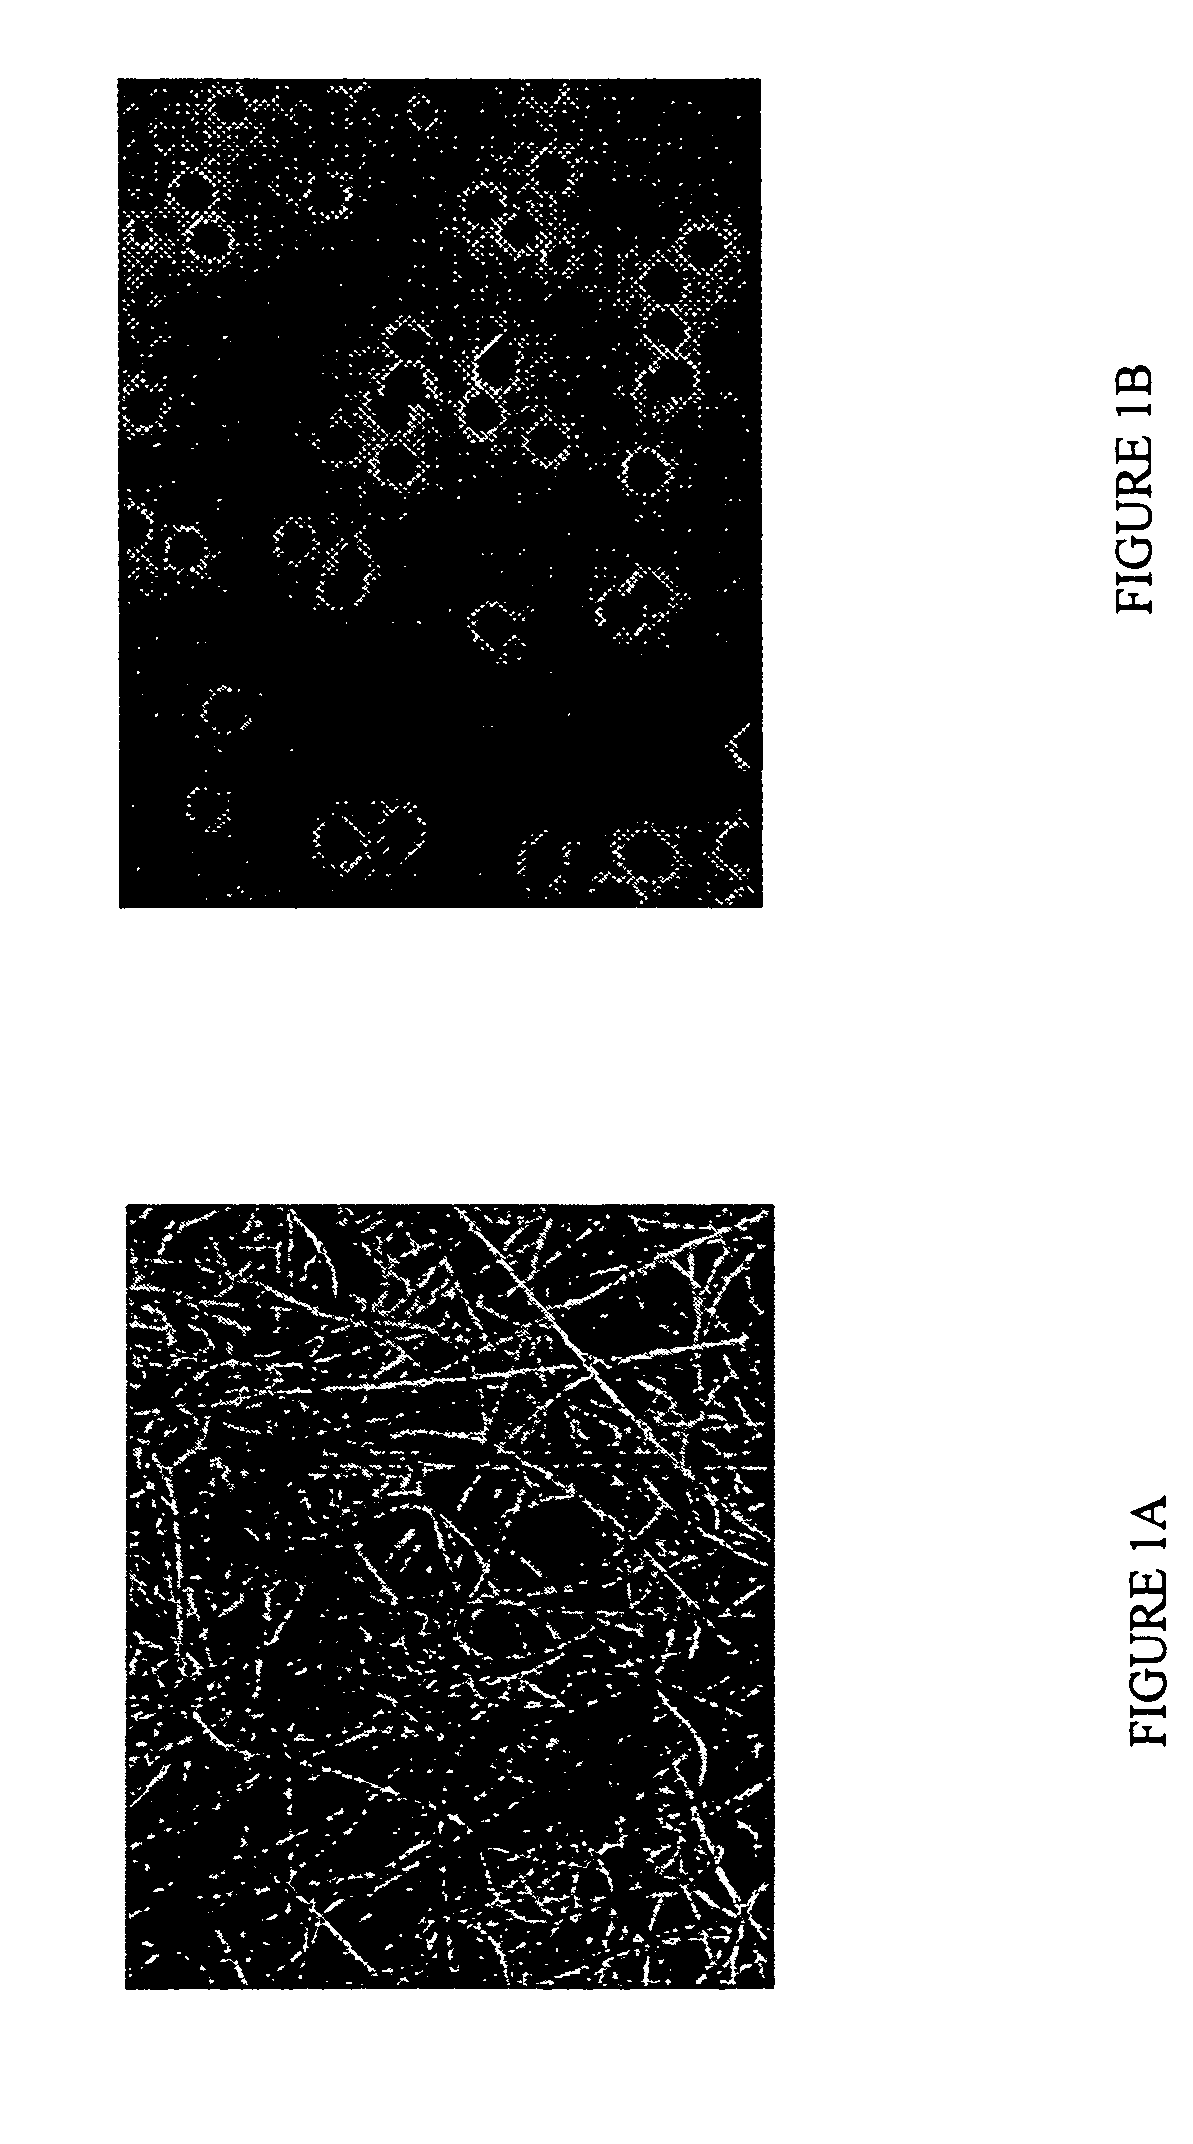 Method for processing samples containing sperm and non-sperm cells for subsequent analysis of the sperm DNA